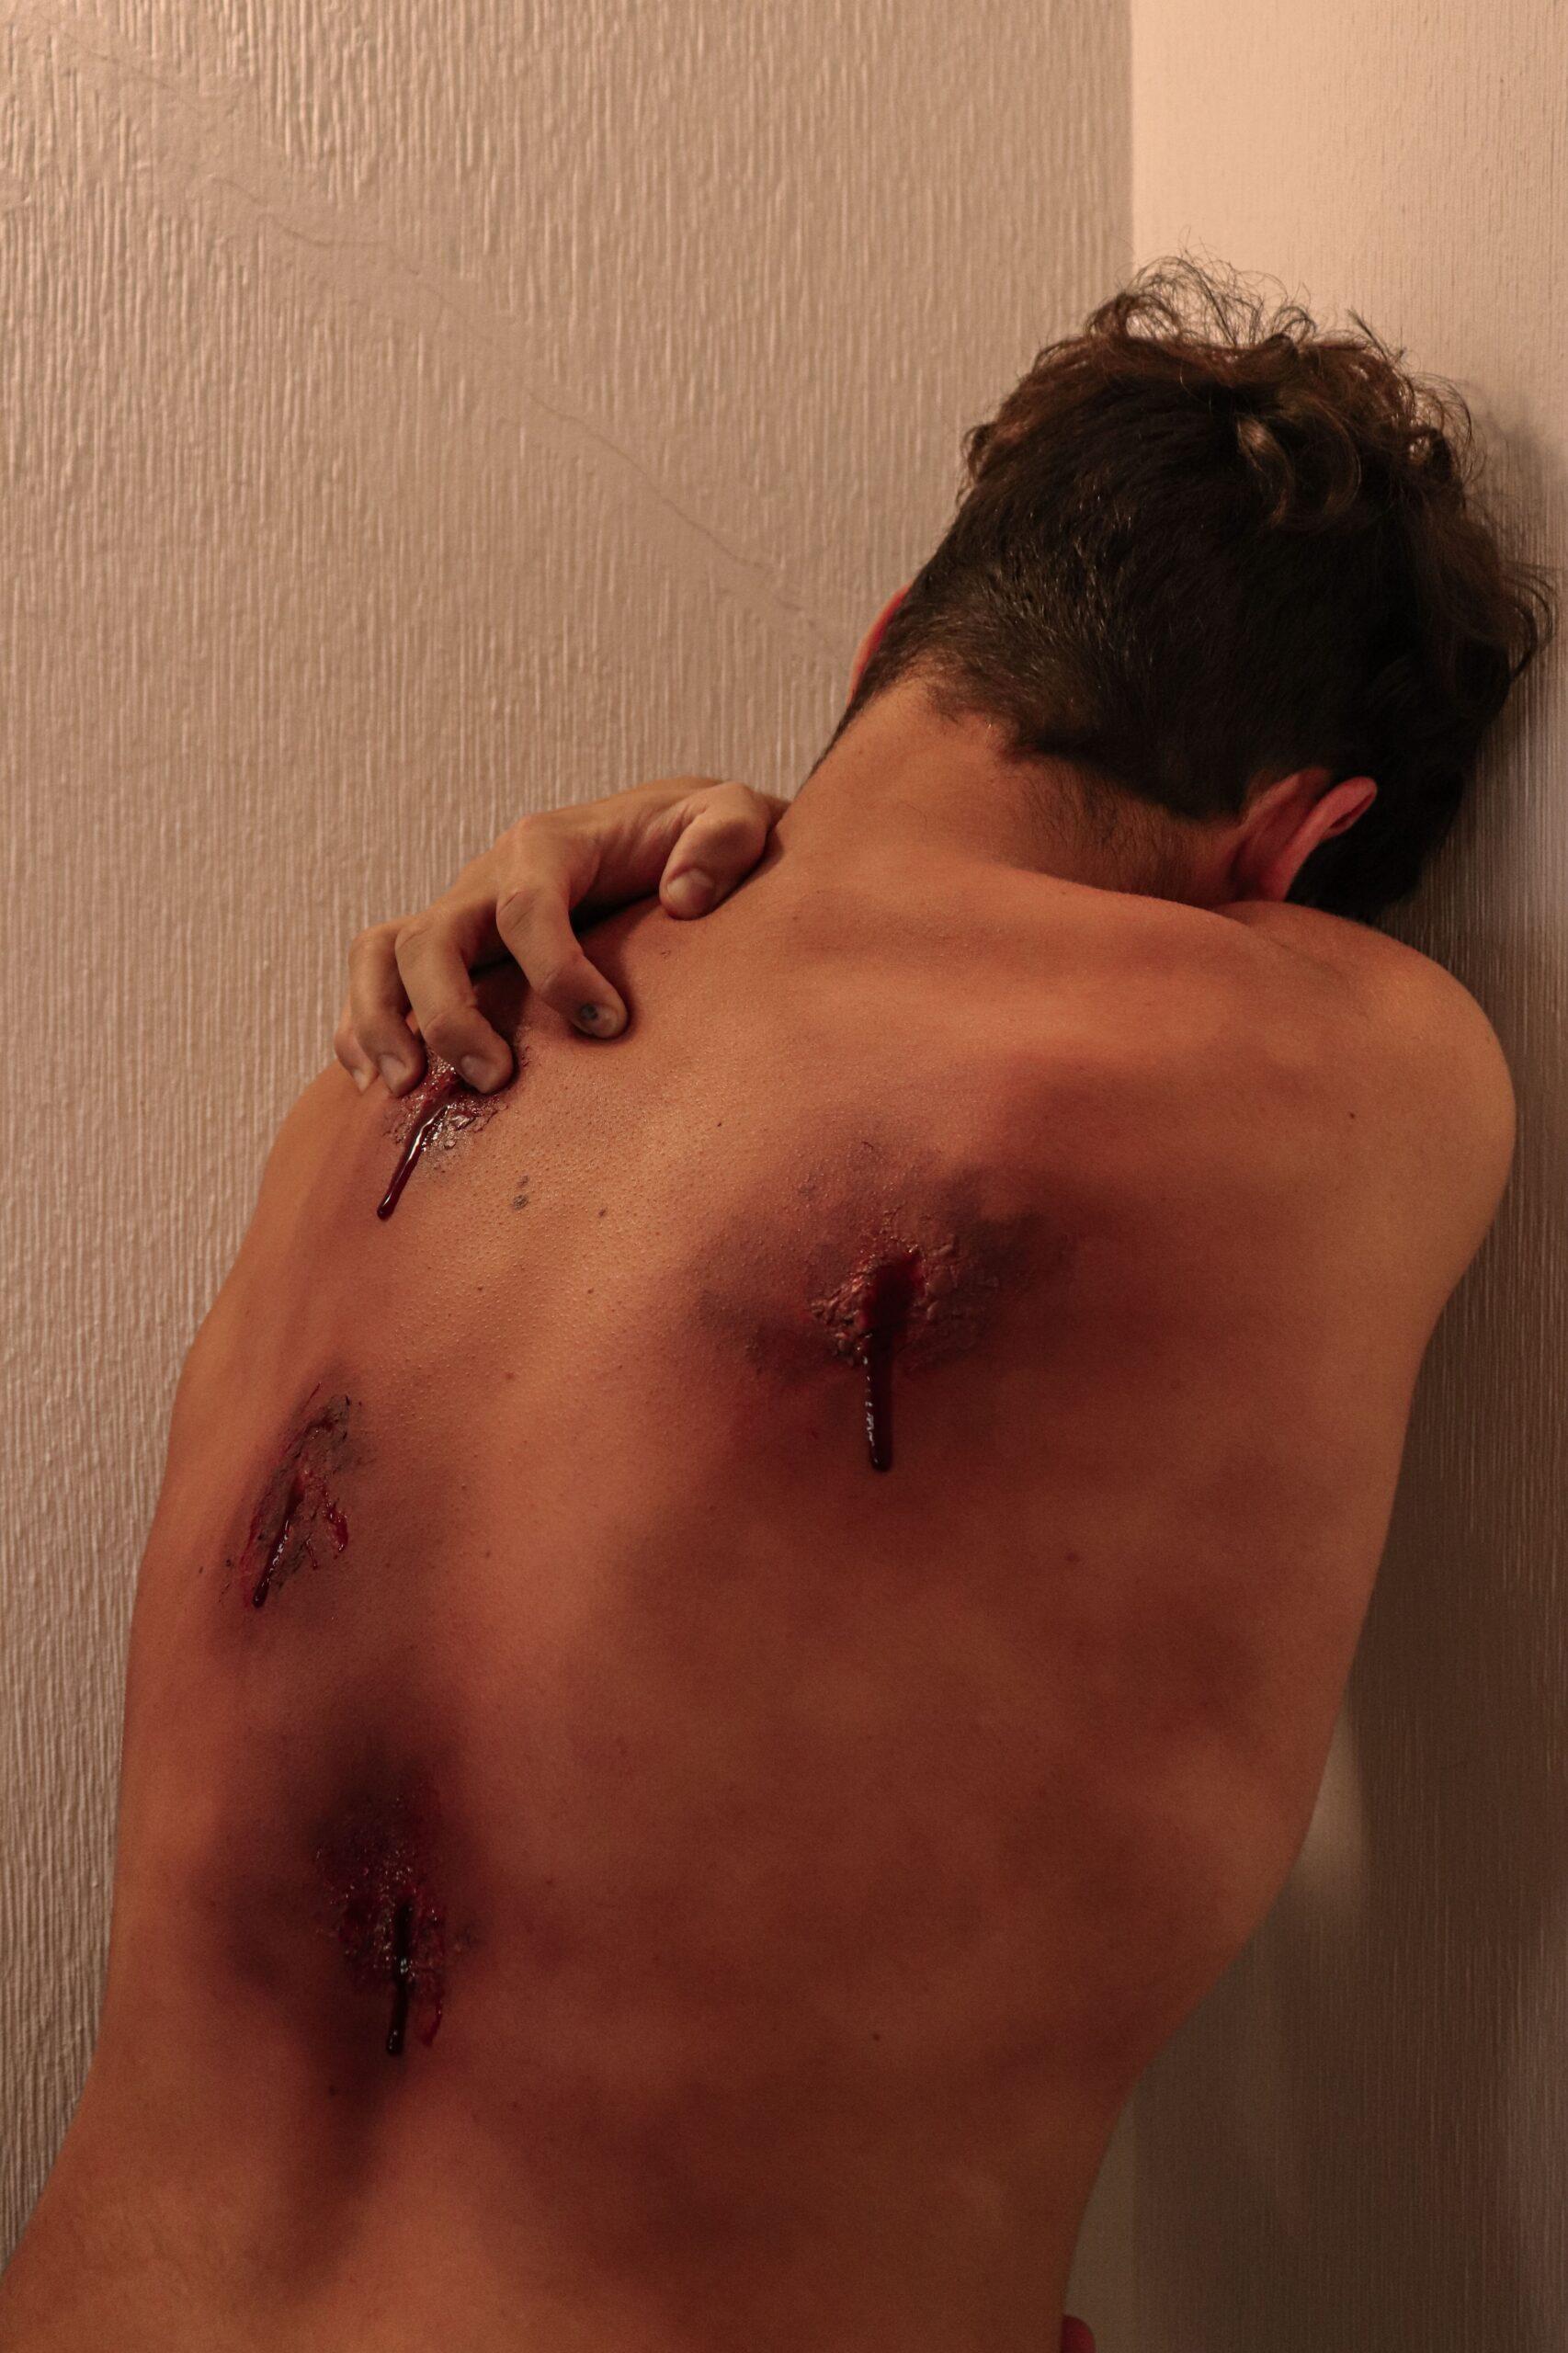 Heridas Abiertas - Photograph by Unknown